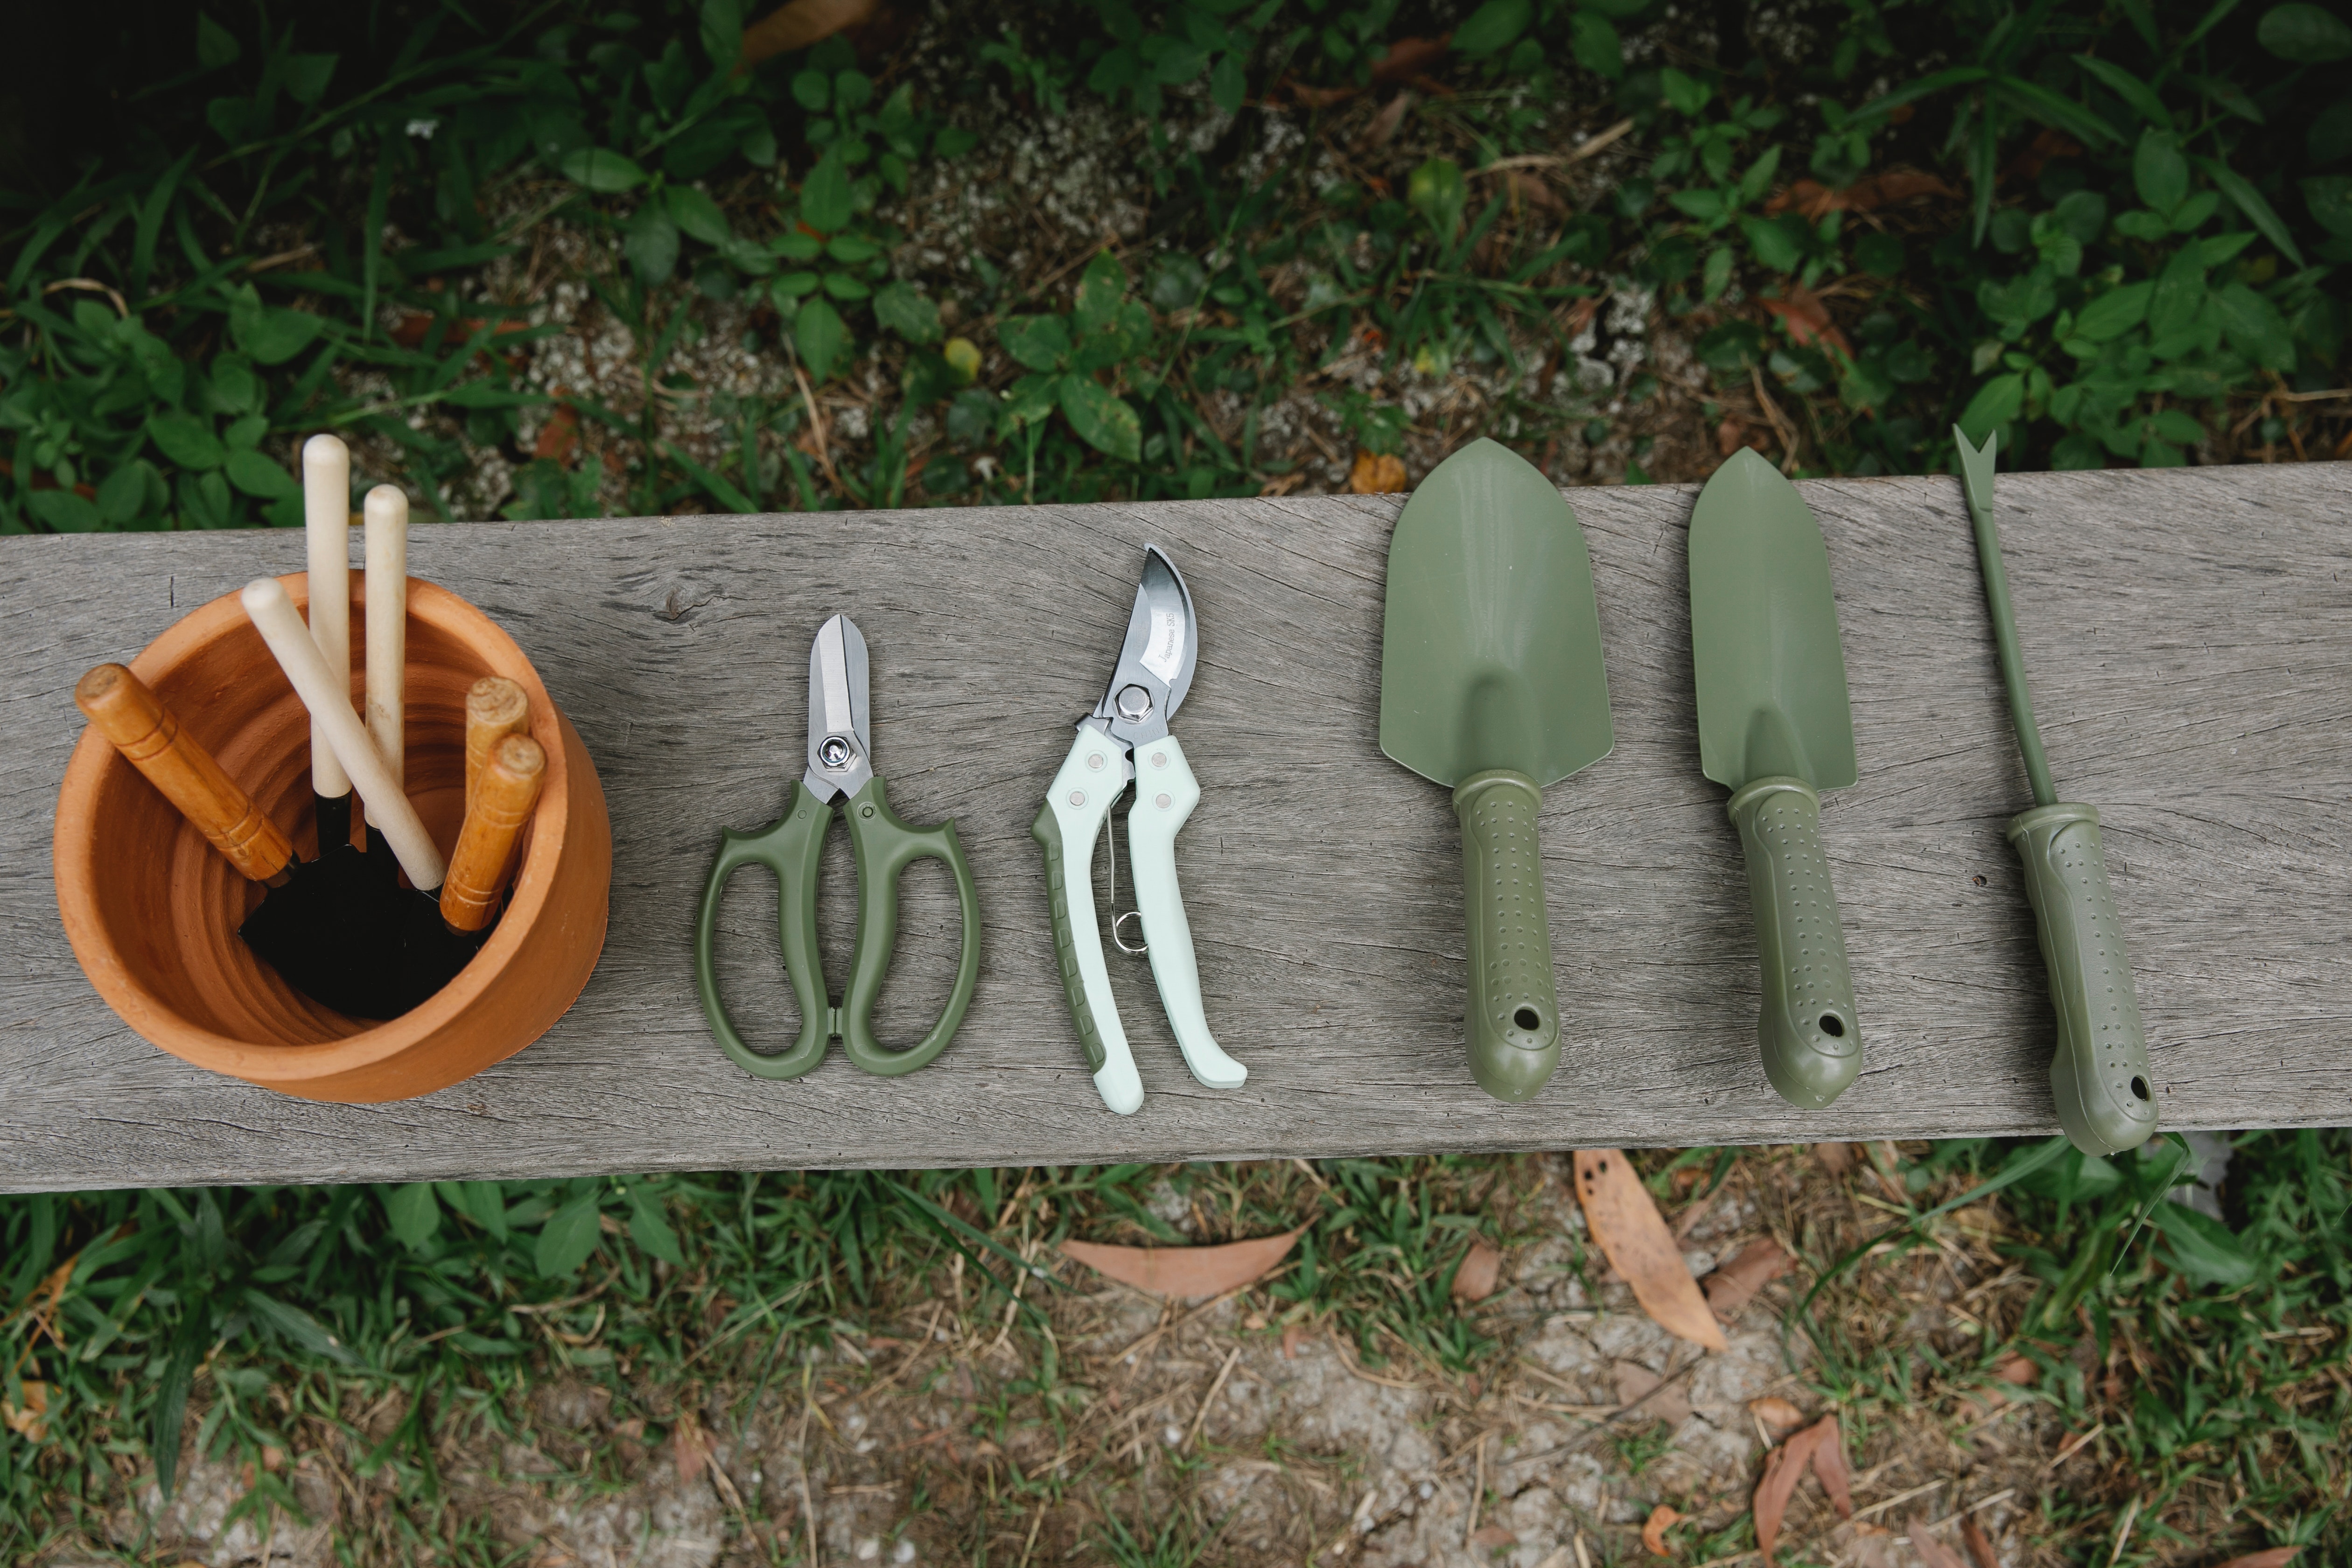 Gardening tools on a bench outdoors